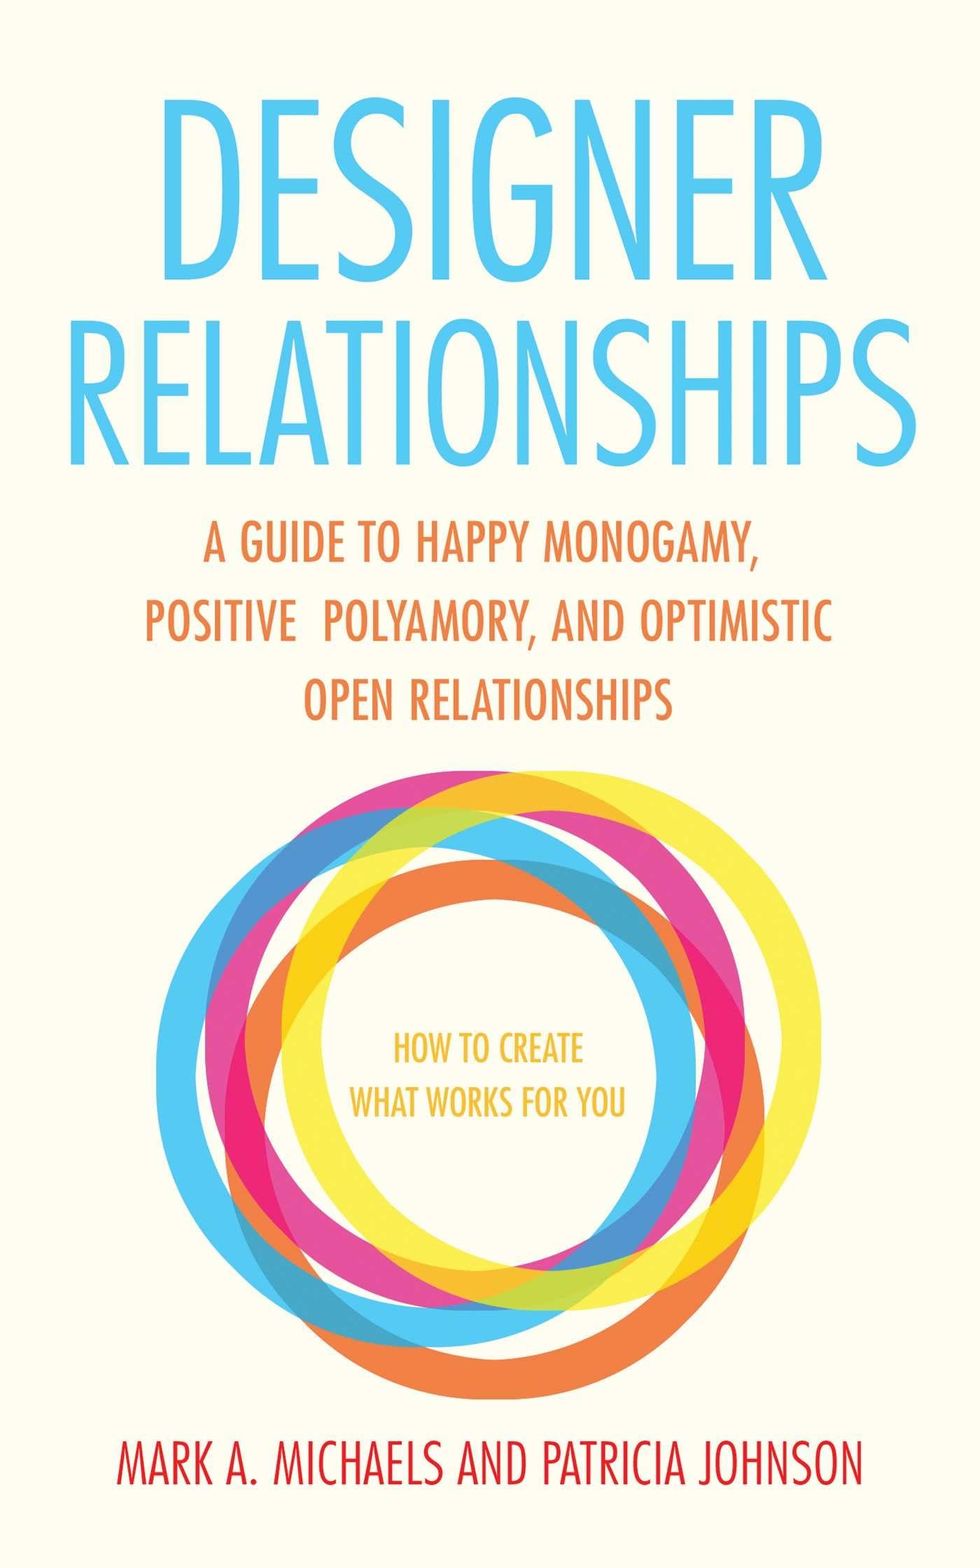 Designer Relationships by Mark A. Michaels and Patricia Johnson